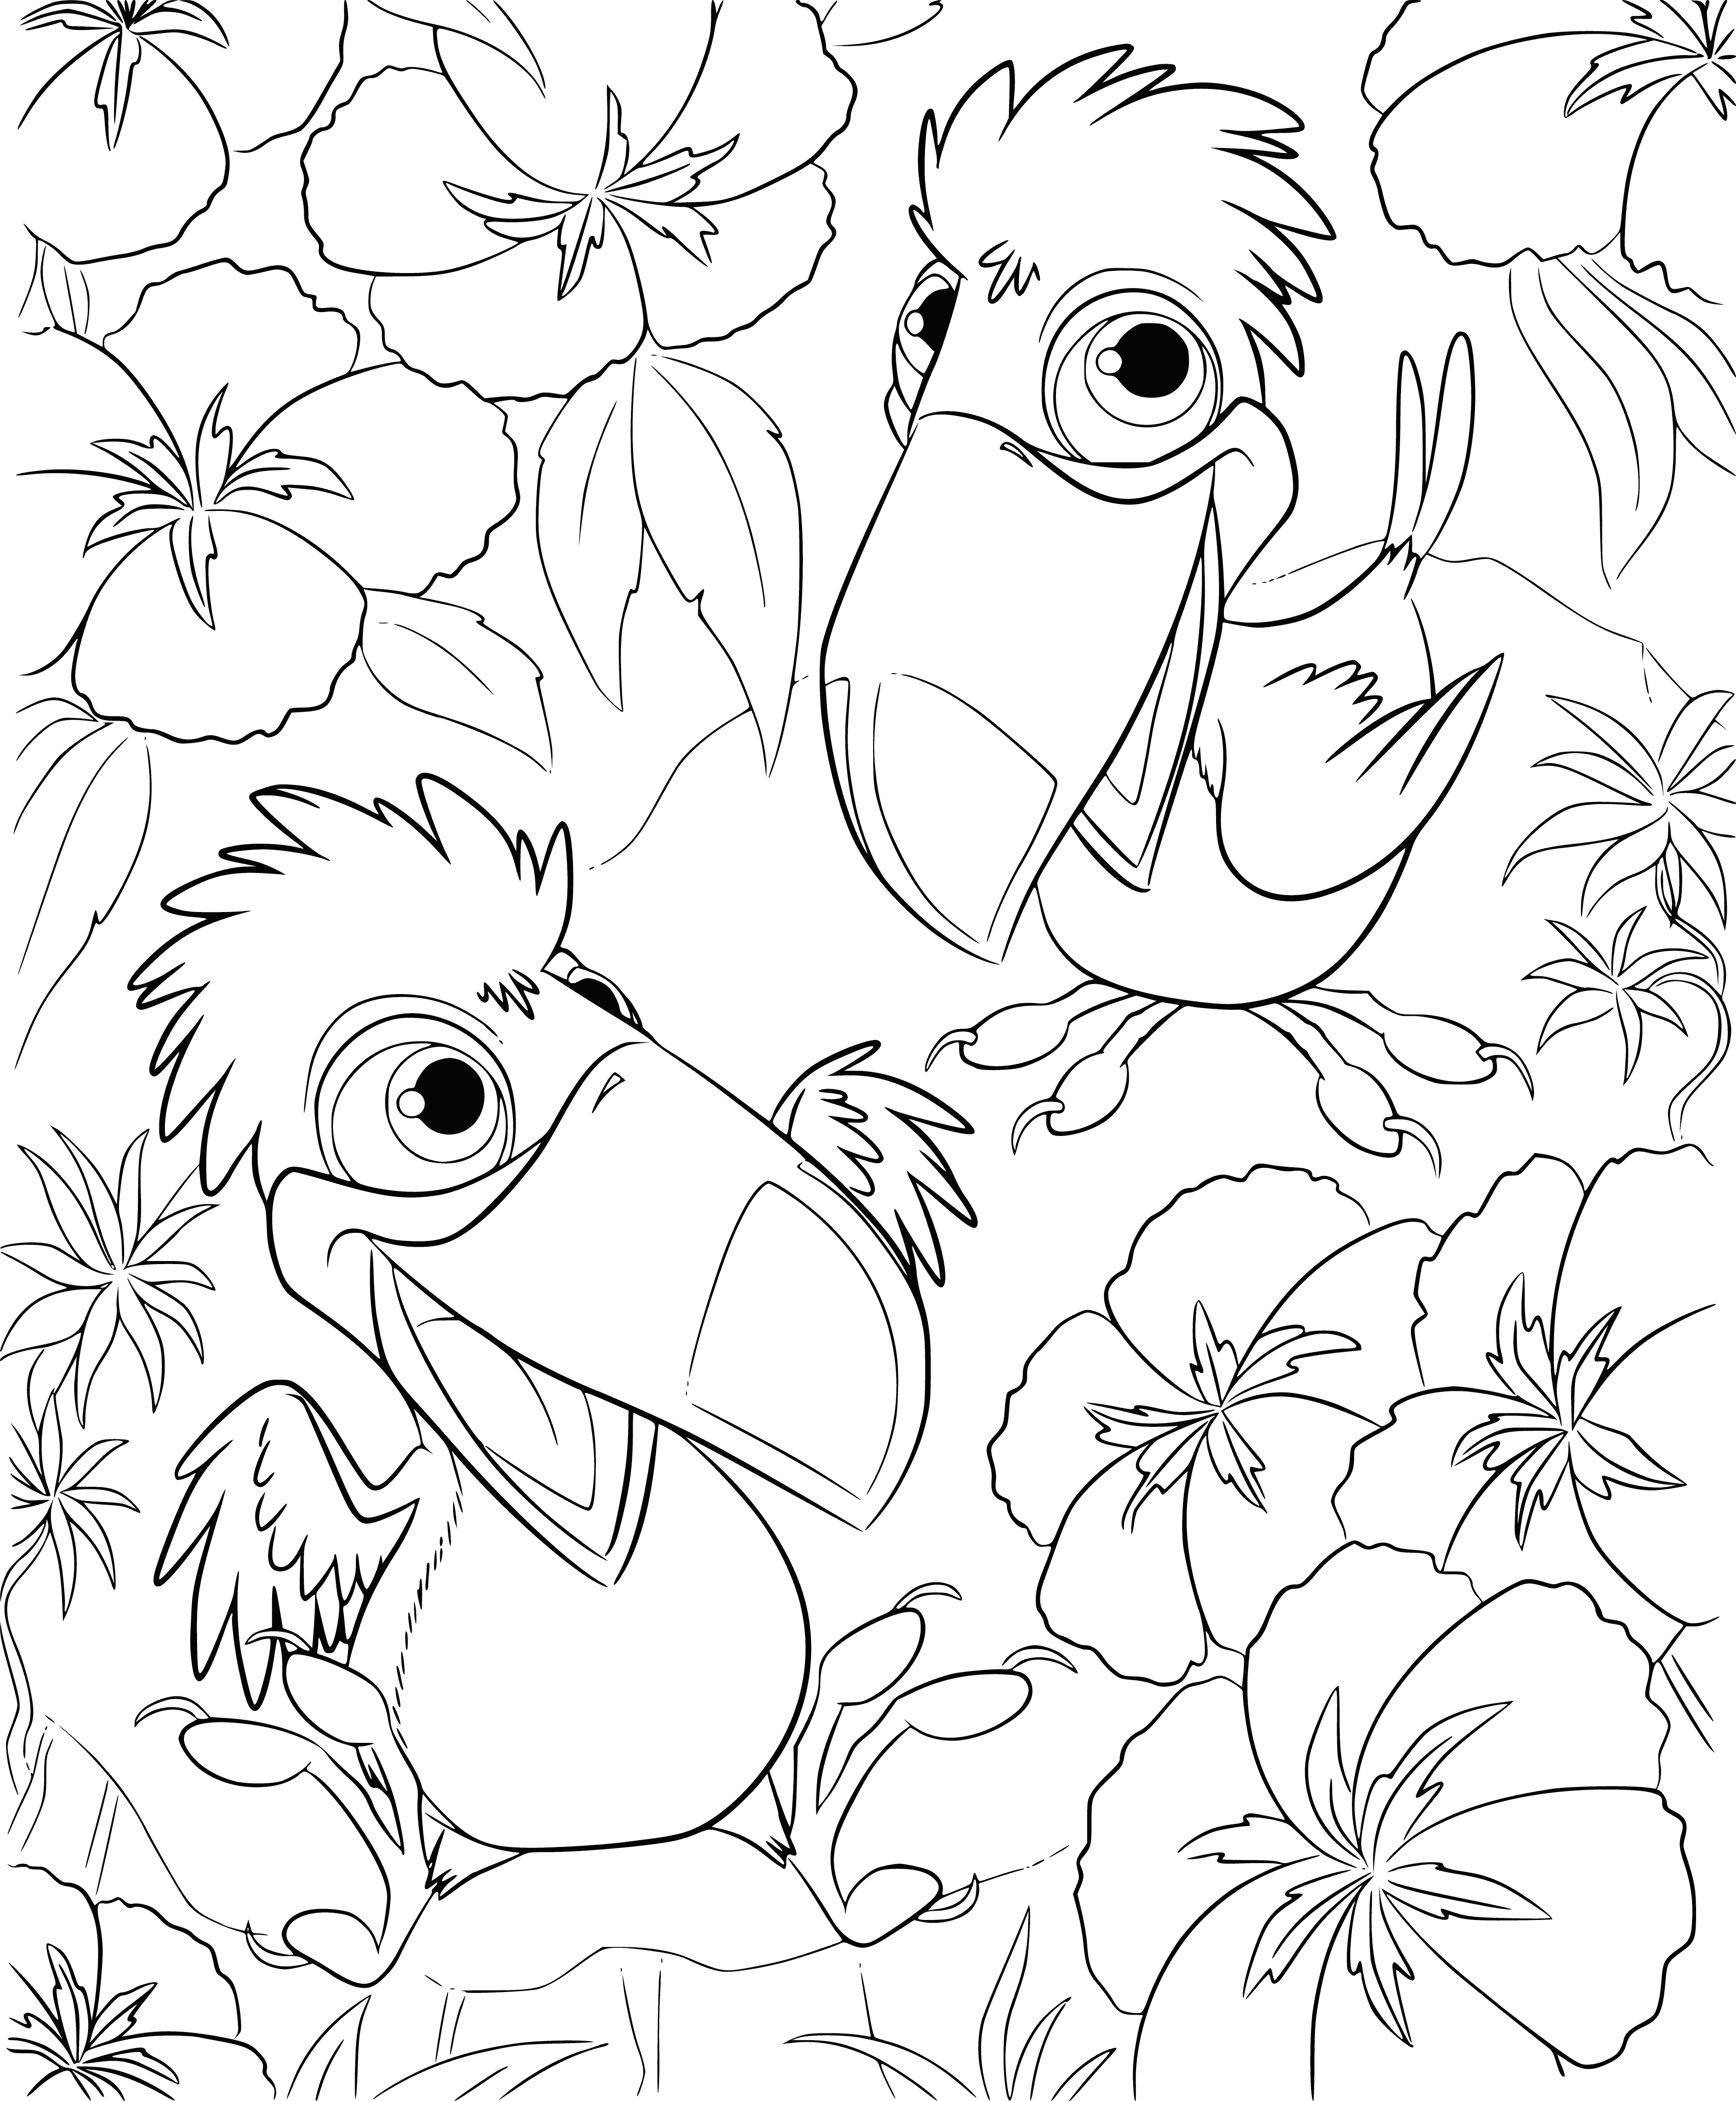 coloring page: Painting of 3 toucans in a tree looking in different directions: blue, yellow & green.